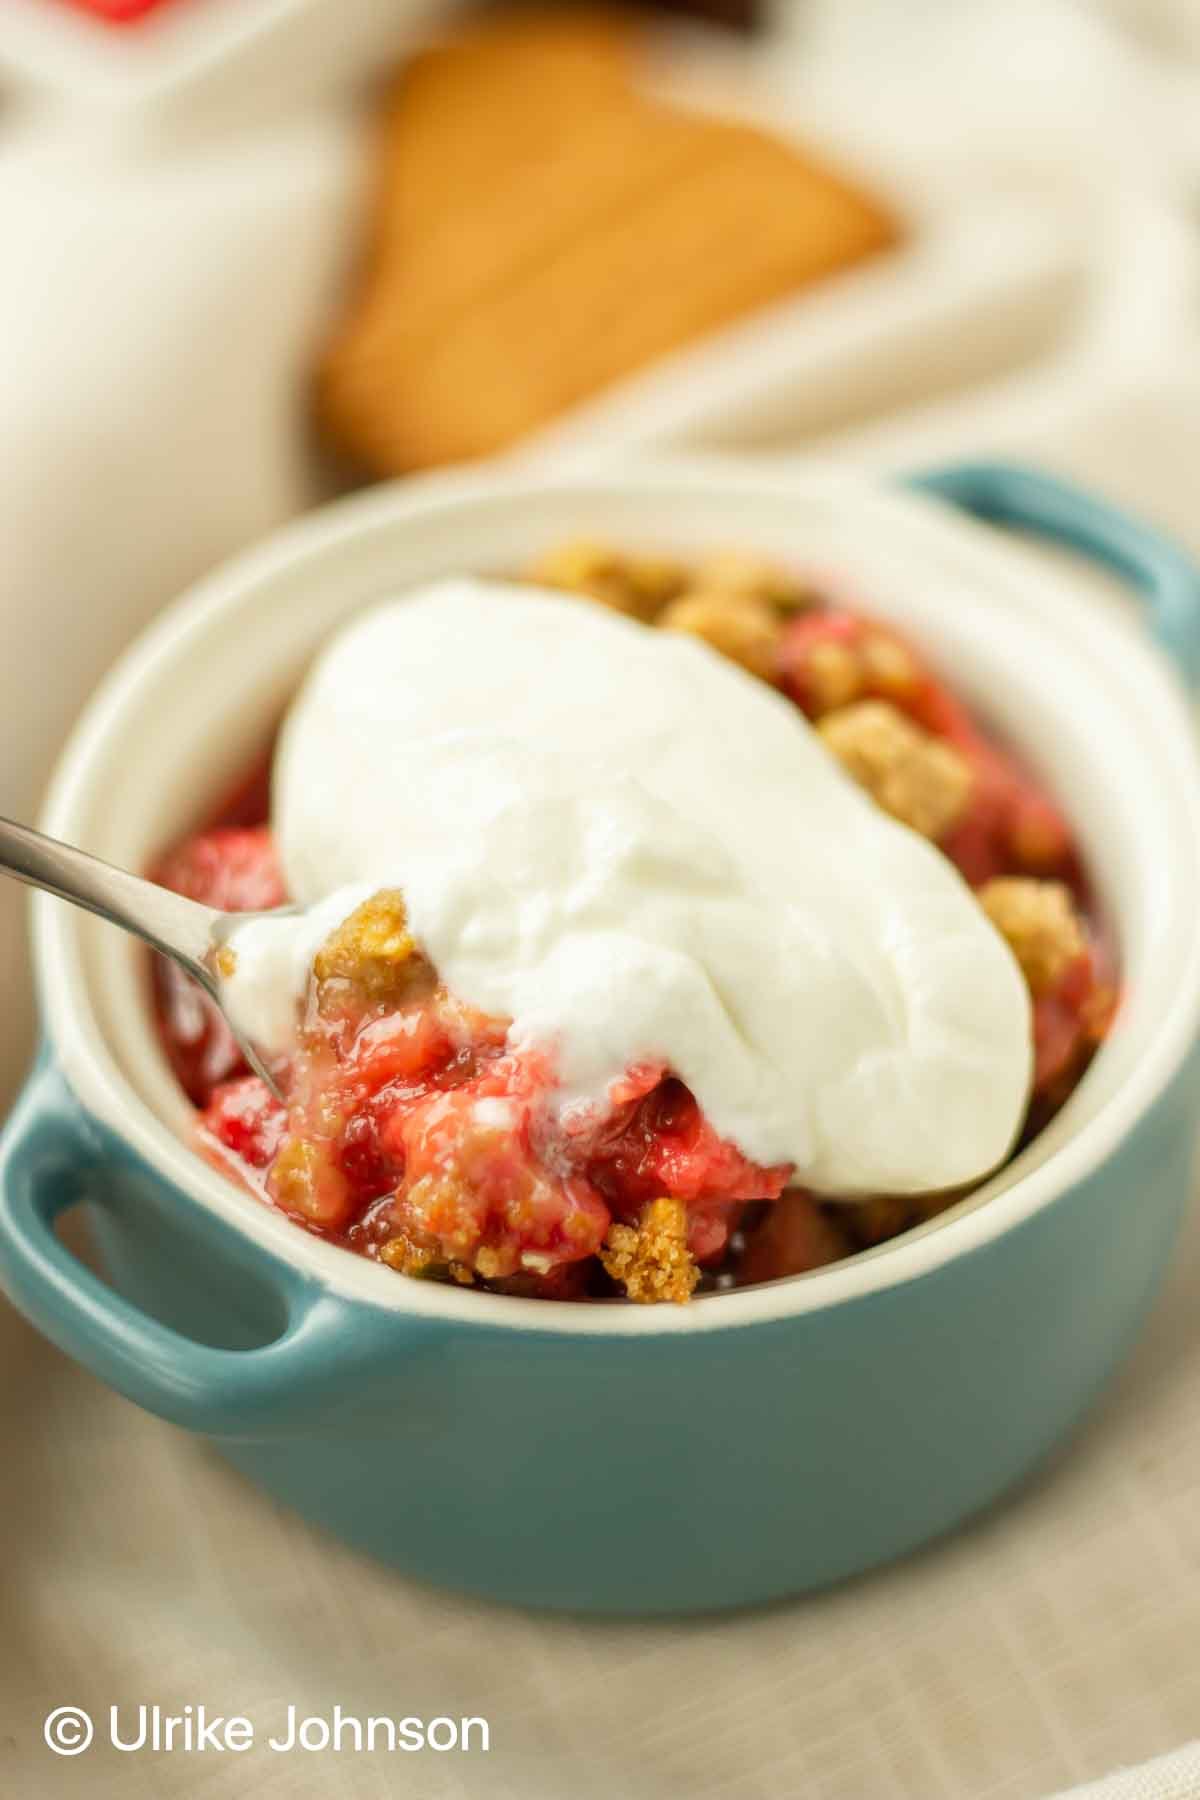 old-fashioned strawberry rhubarb crumble with pistachio streusel topping served in a small blue casserole dish 